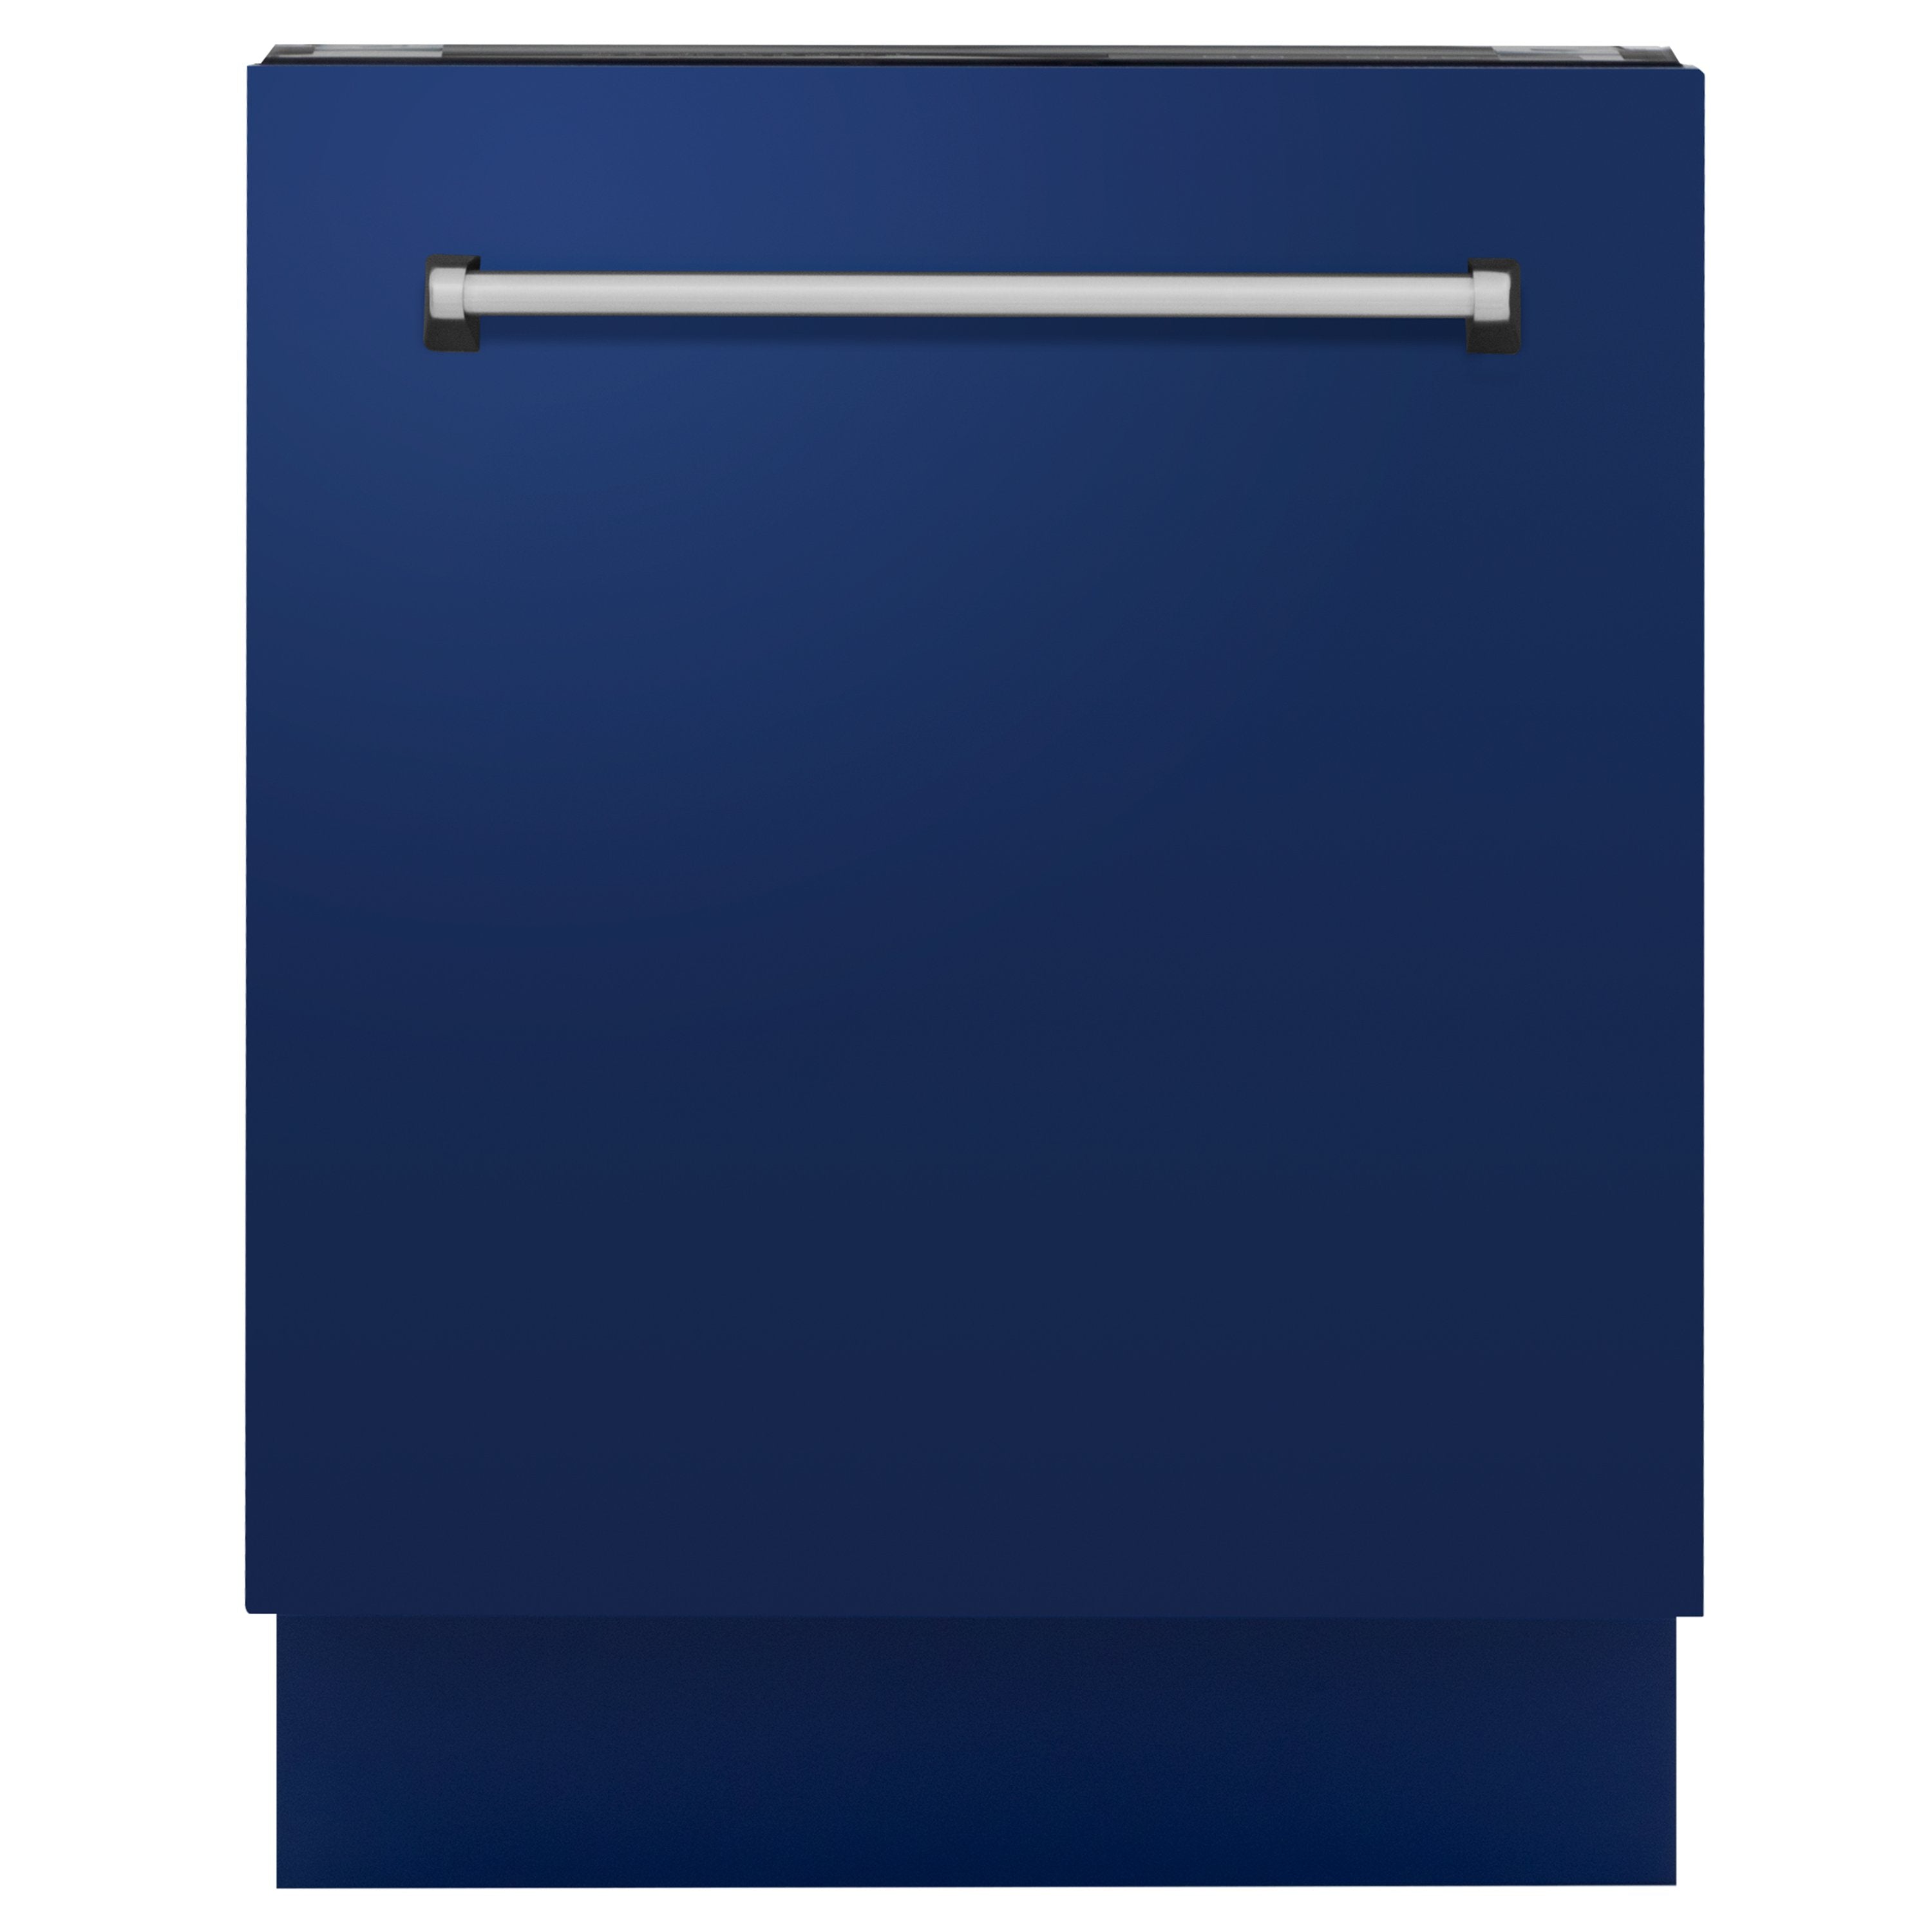 ZLINE 24 in. Top Control Tall Dishwasher in Blue Gloss with 3rd Rack